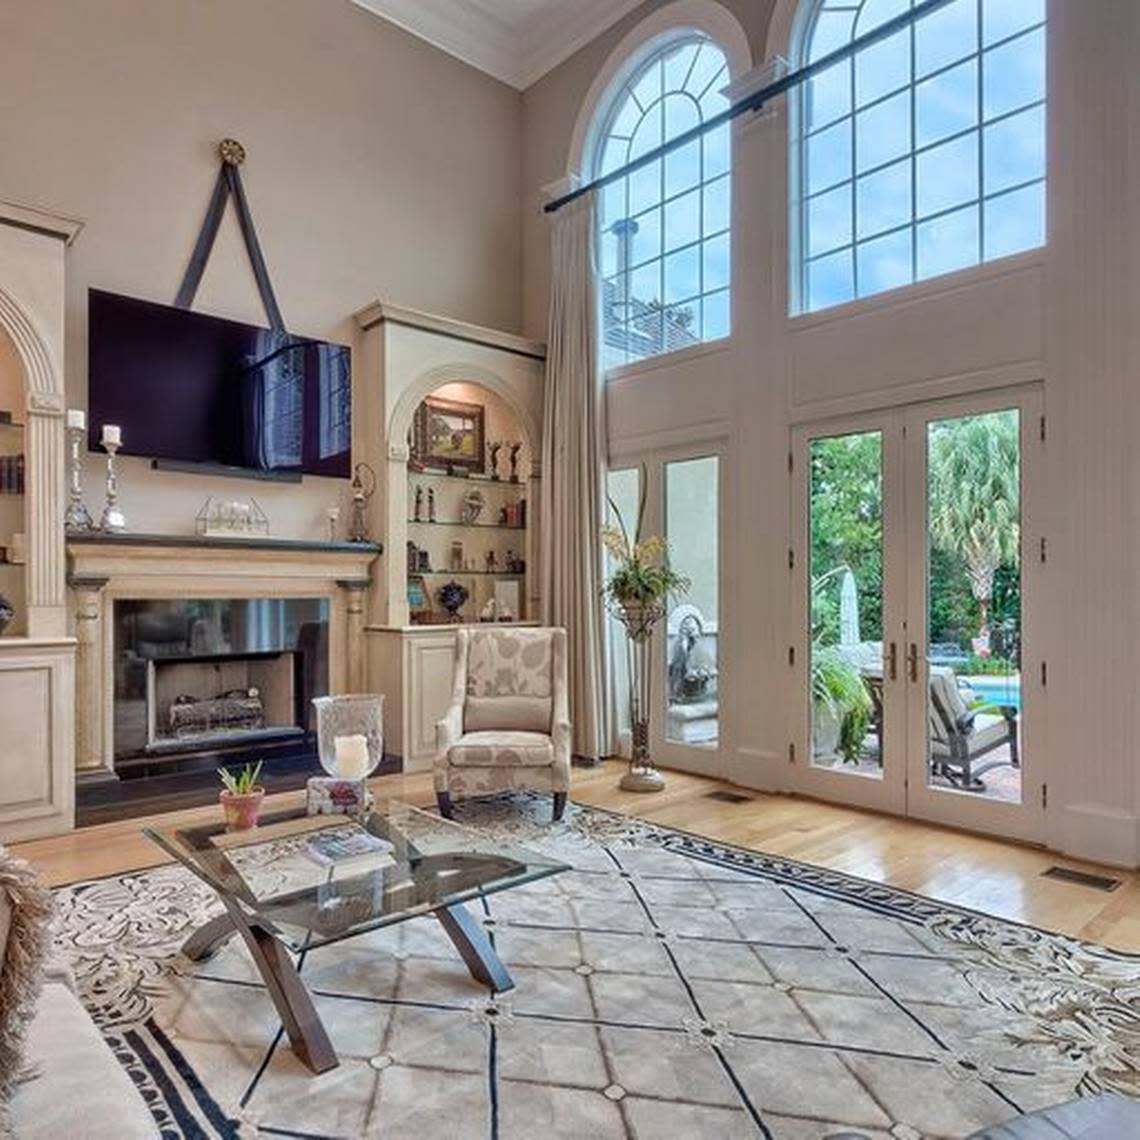 A view of the main room inside a $1.3 million luxury home for sale in Columbia.